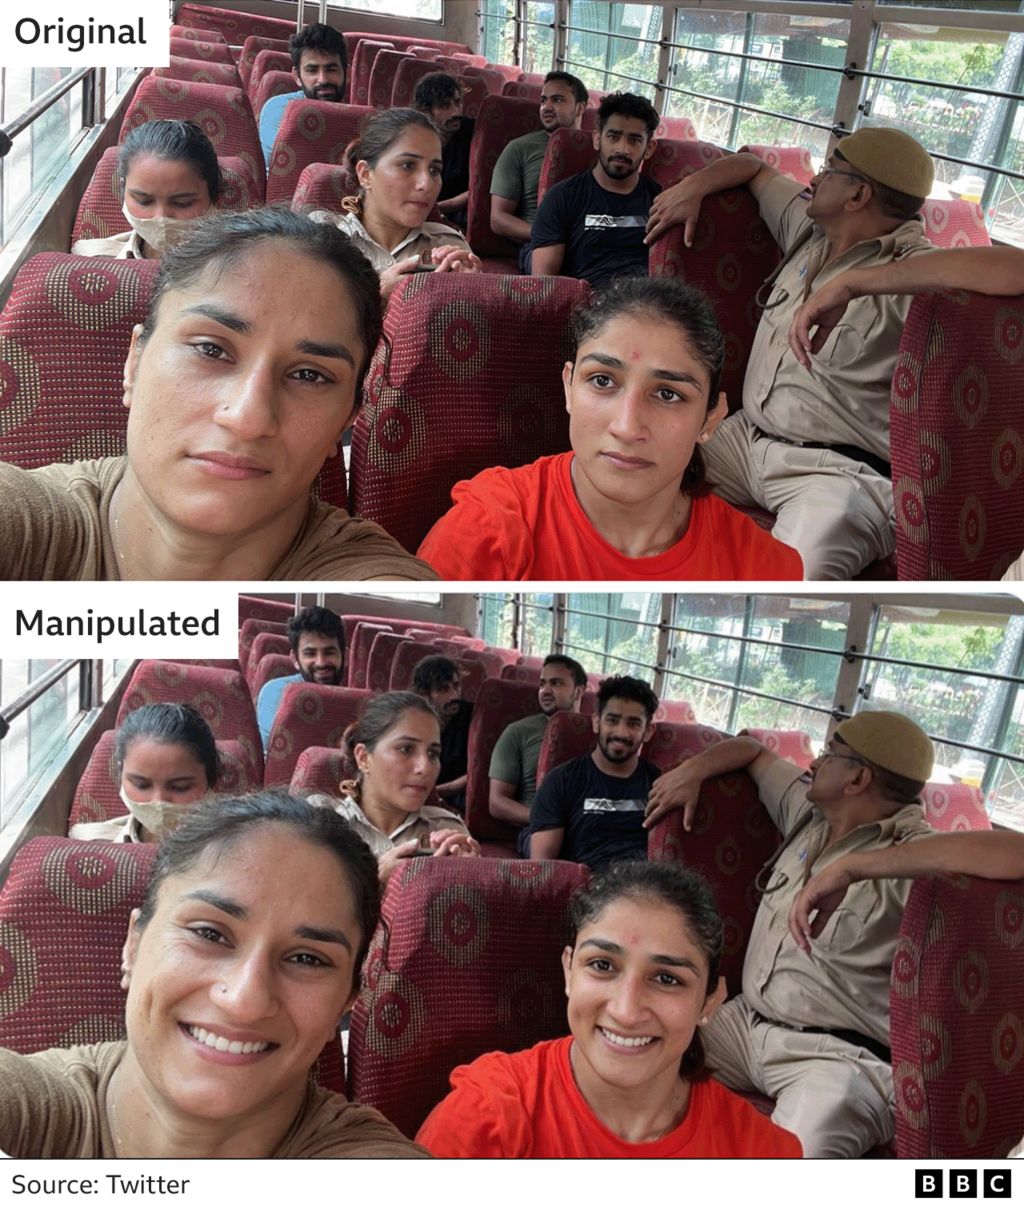 Indian wrestlers selfie on coach, comparing original and manipulated images